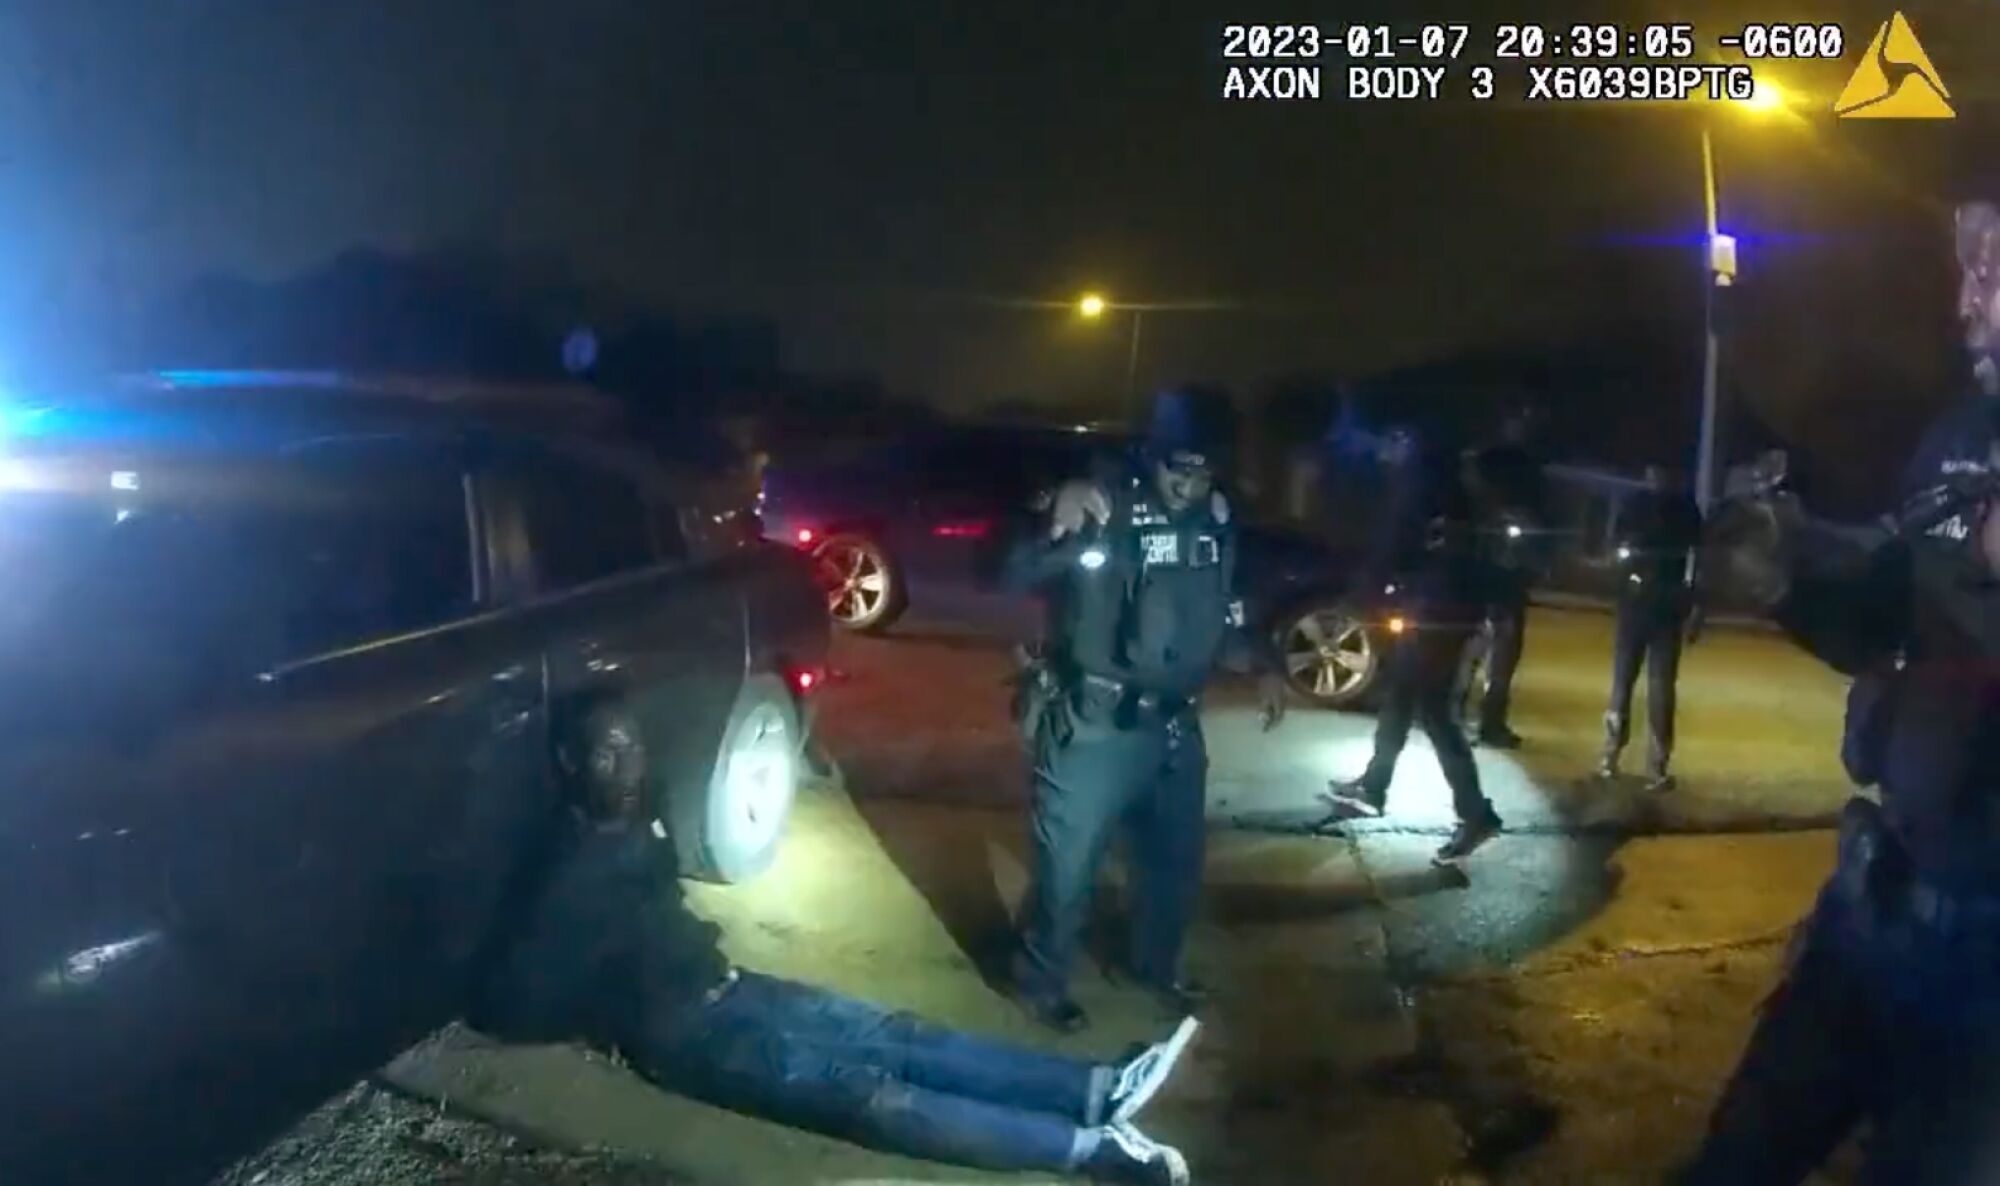 After the beating police officers placed Tyre Nichols against a police cruiser.